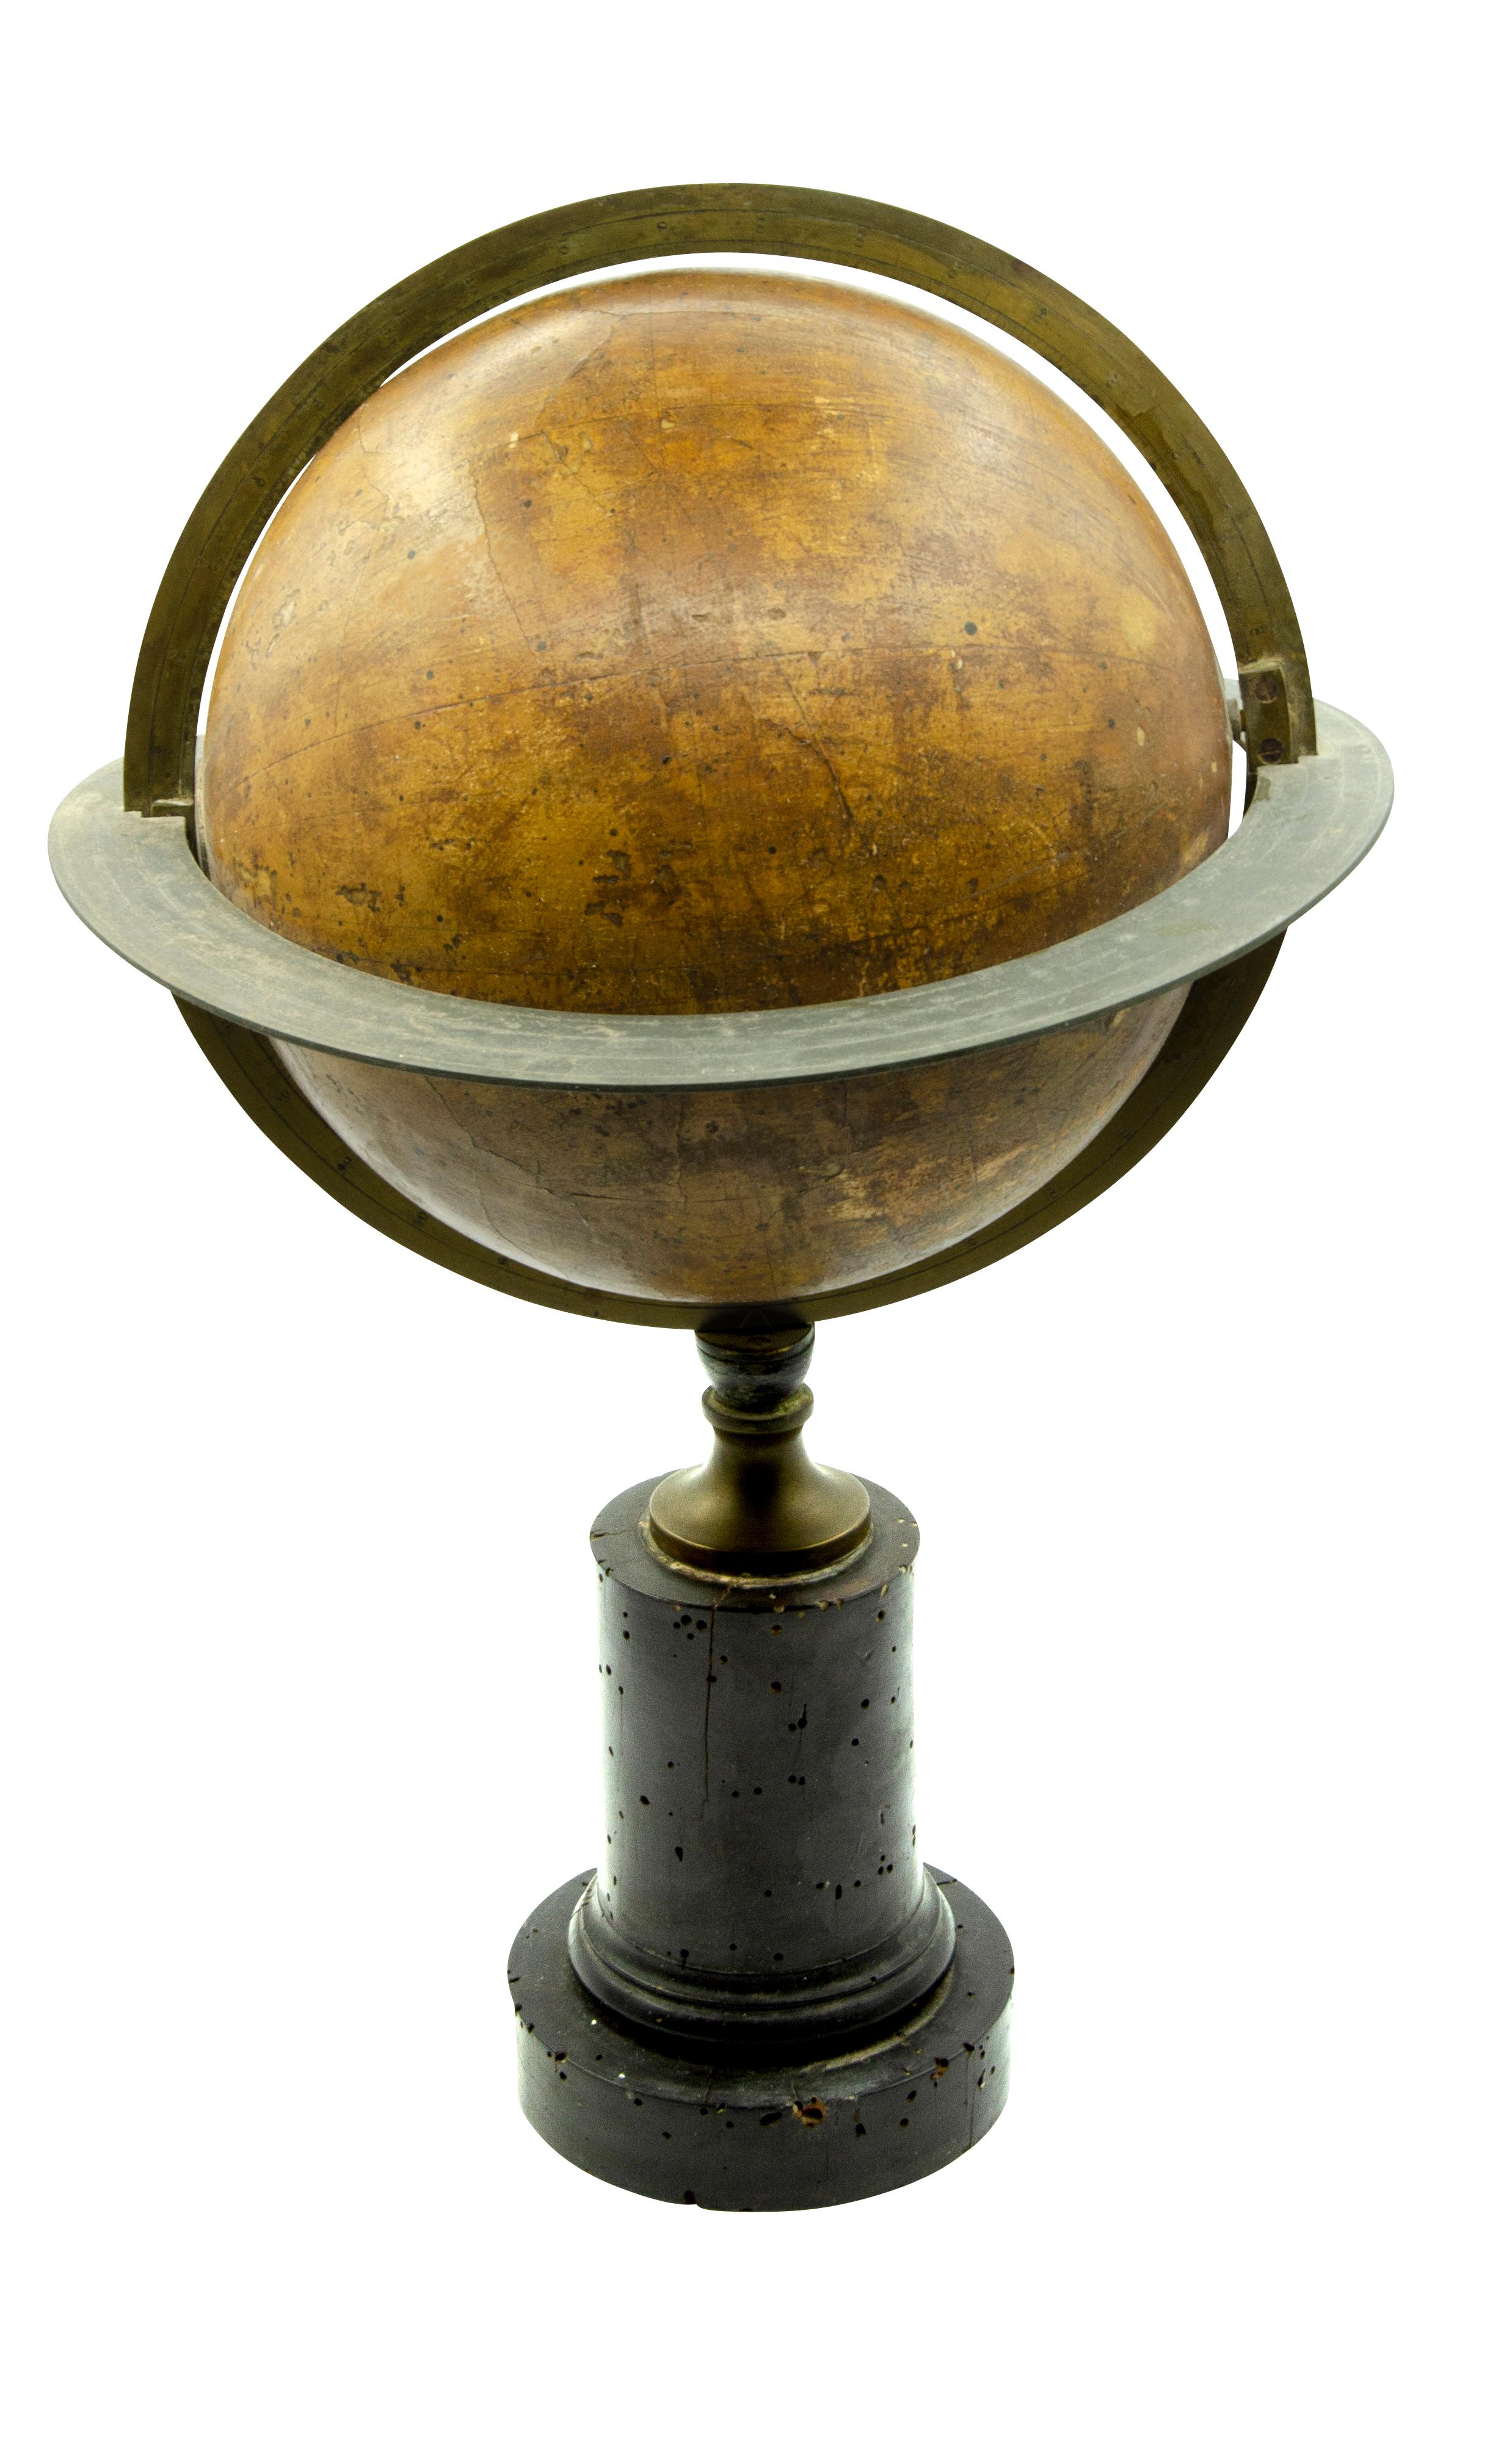 One terrestrial and the other celestial. With bronze chapter ring. Ebonized wood bases. Signed by maker and dated 1844.